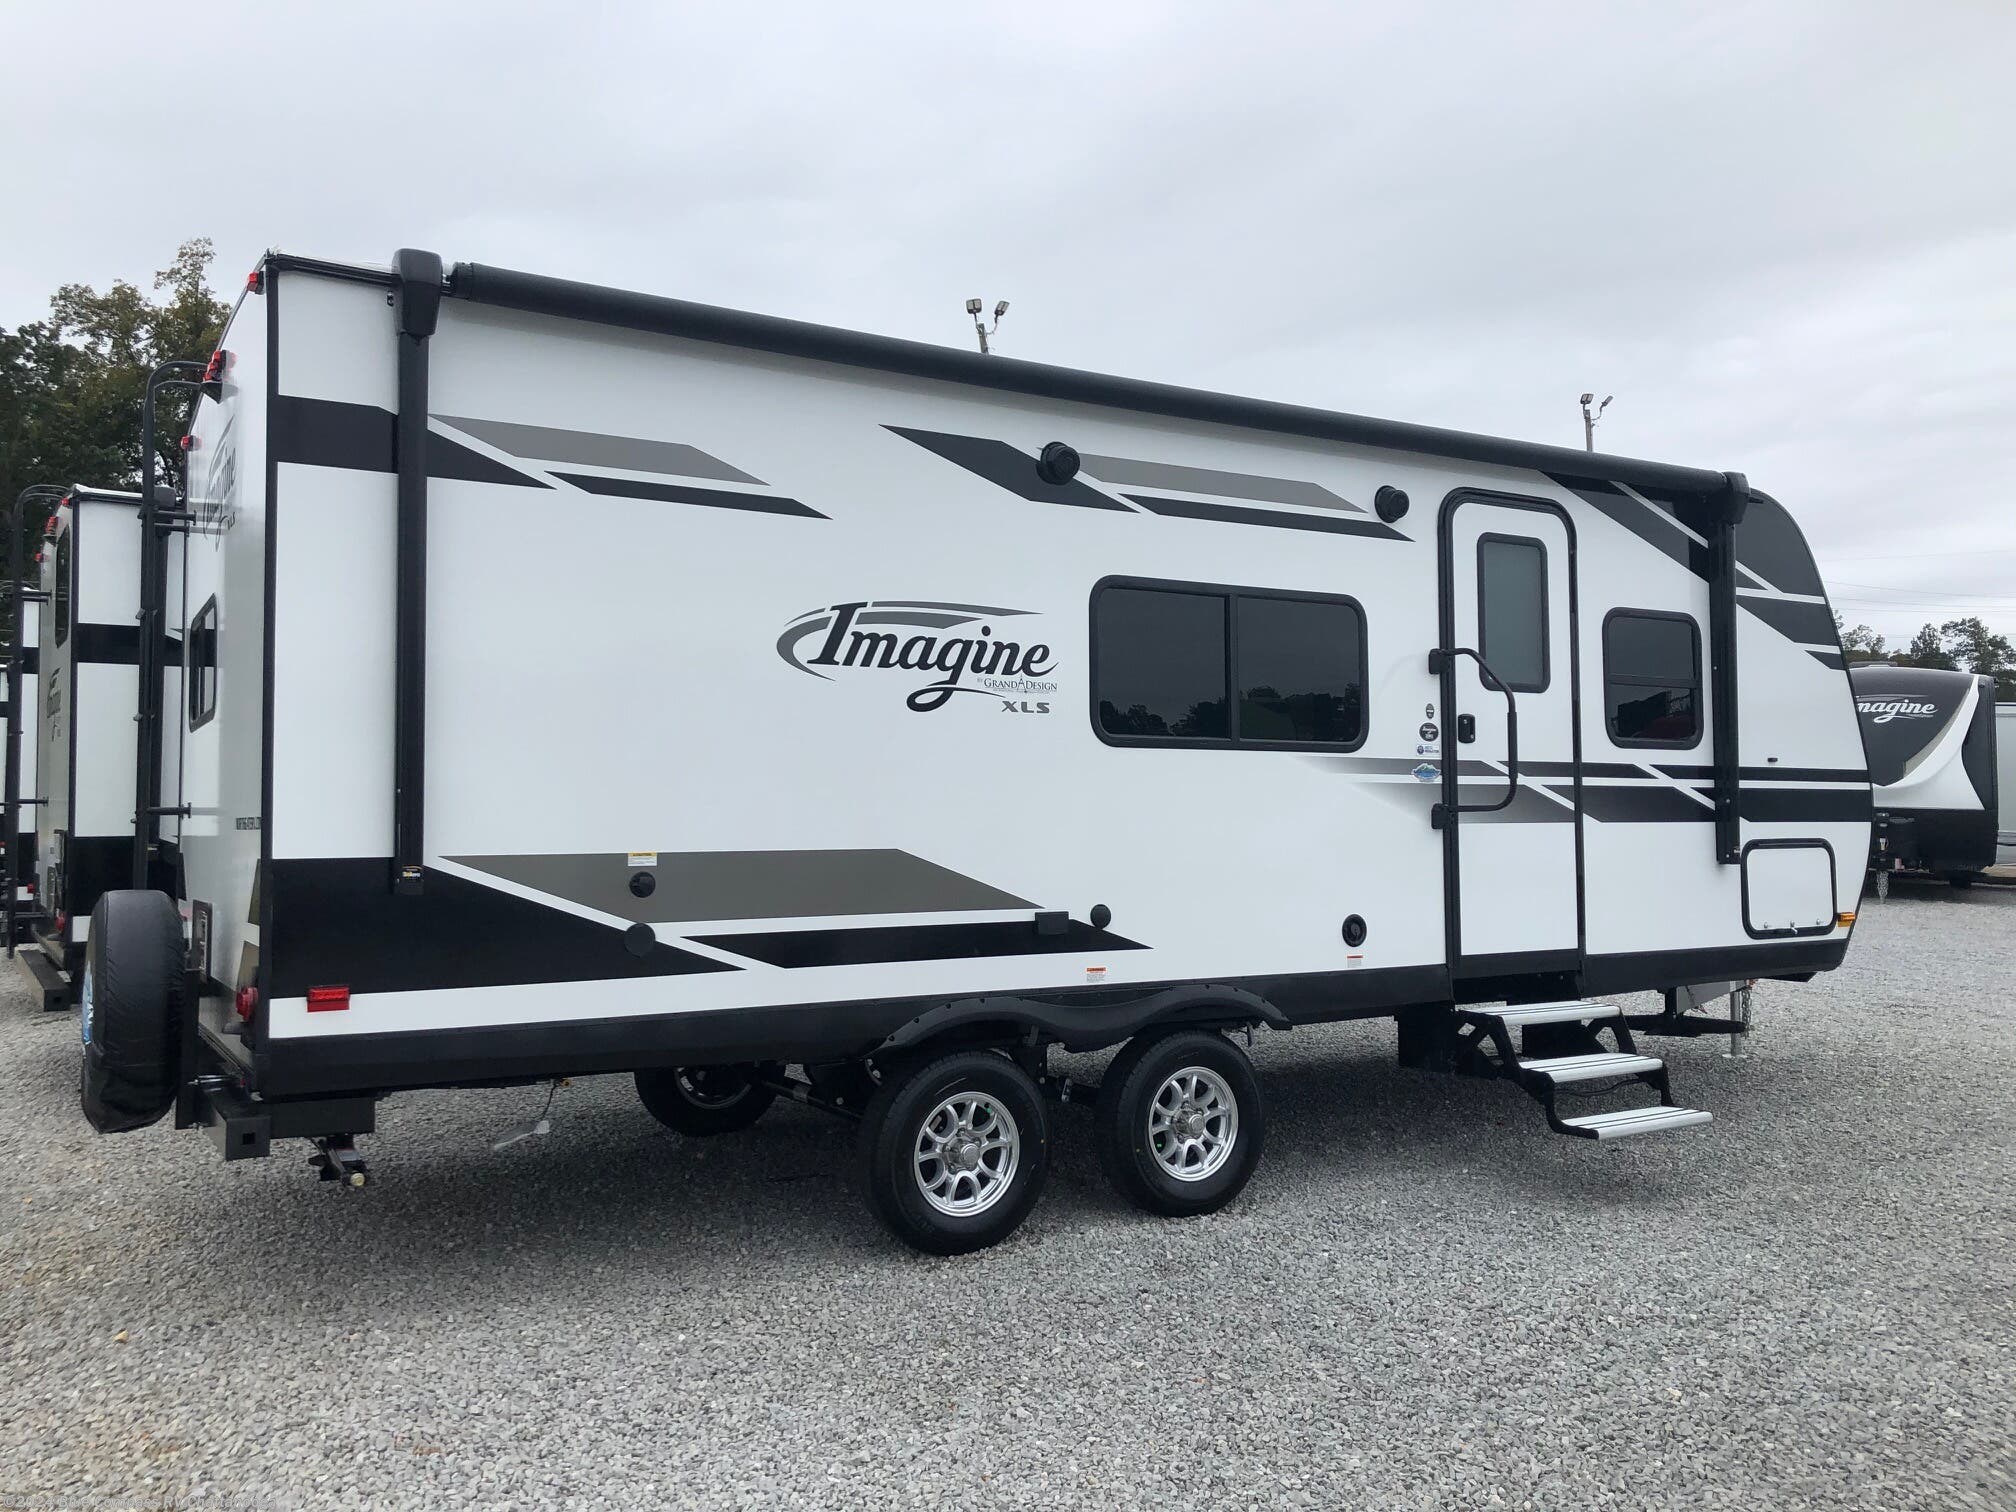 used imagine xls travel trailer for sale